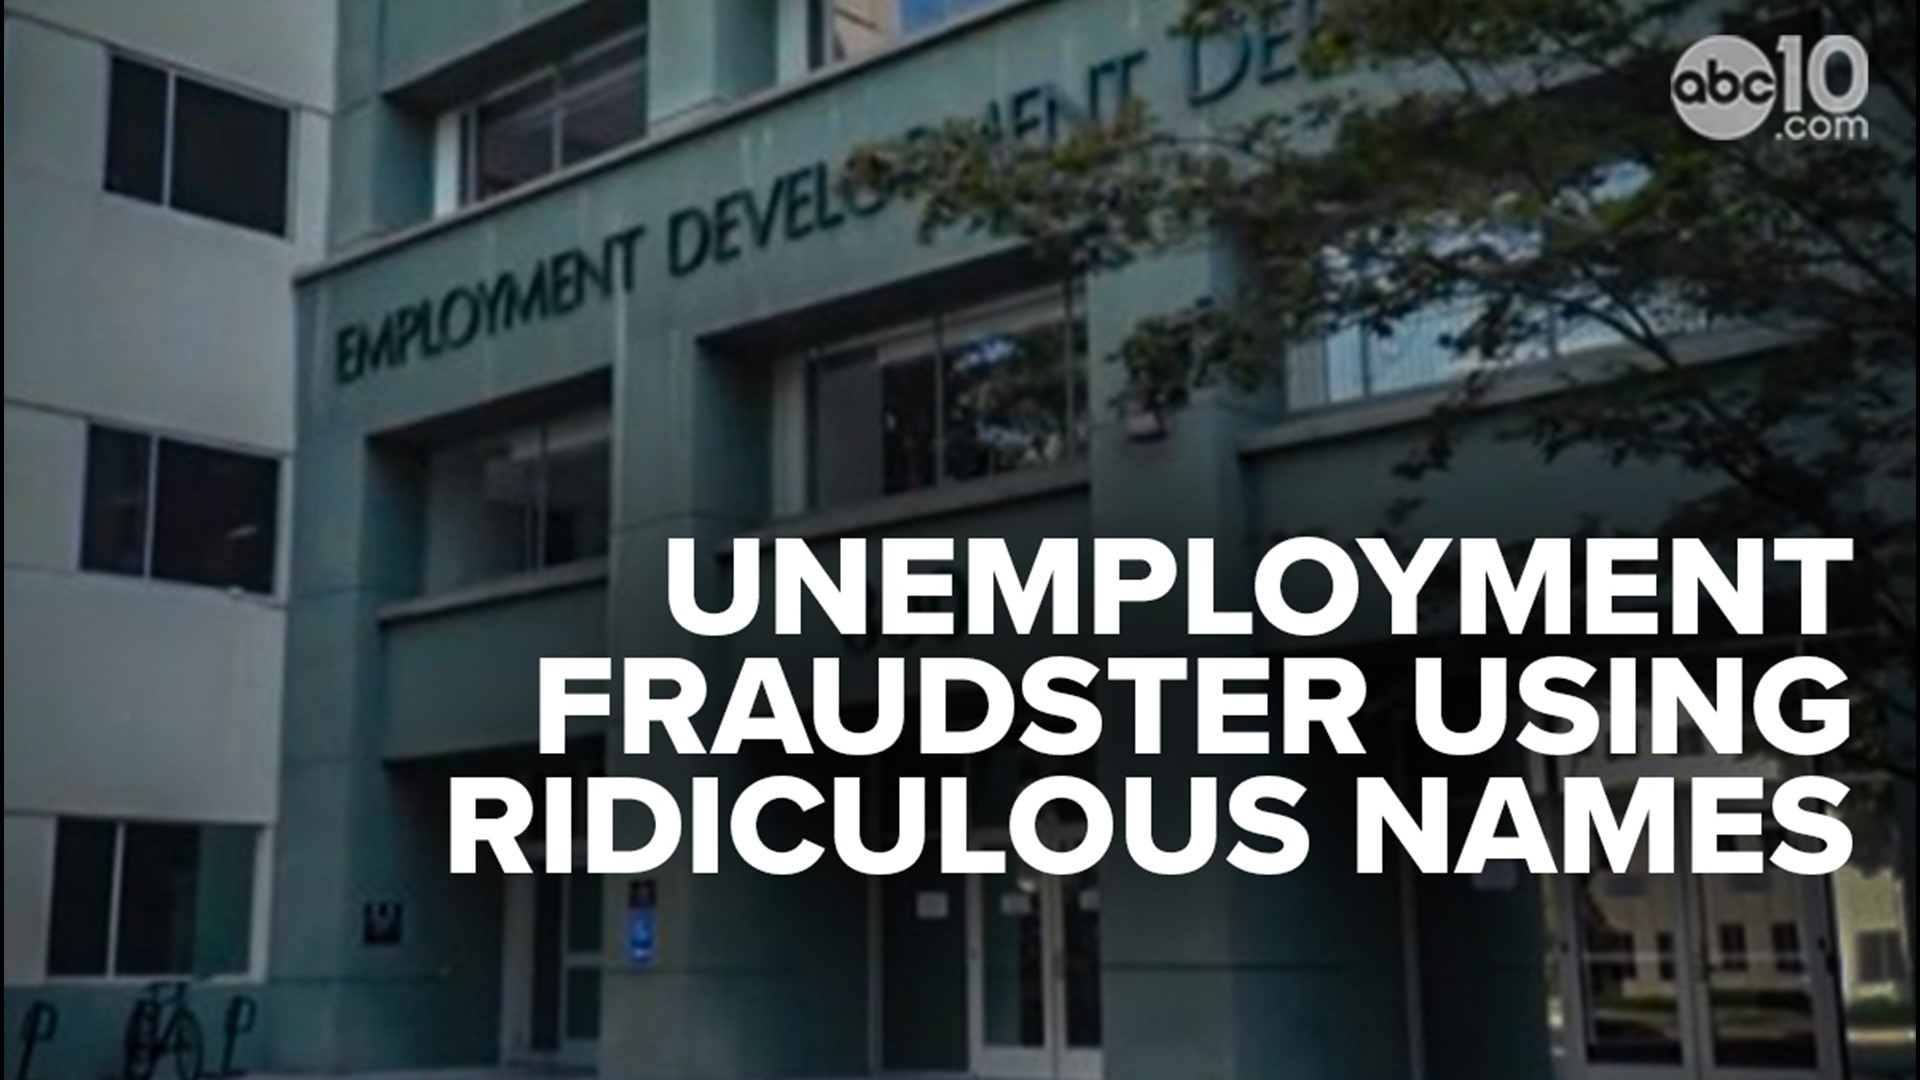 About $20 billion have been suspected to be lost to Employment Development Department fraud in California unemployment claims, some people using ridiculous names.